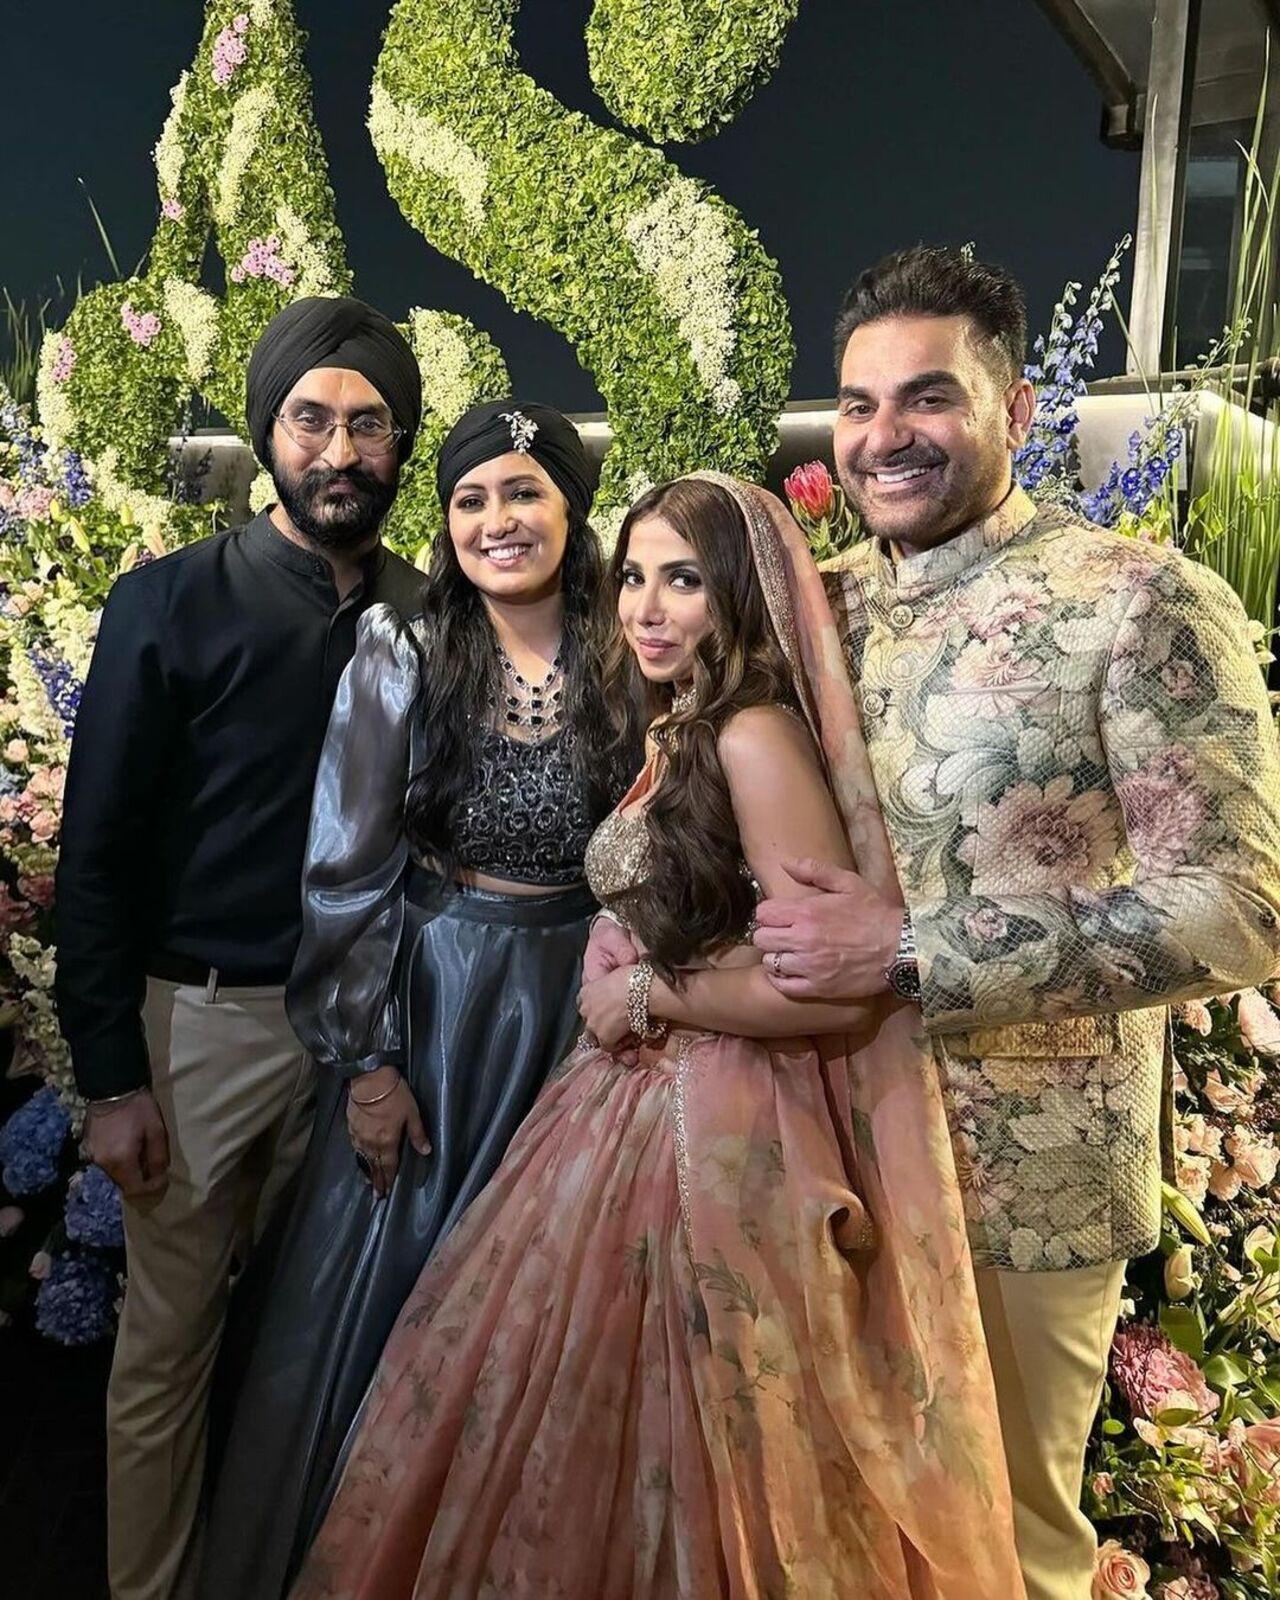 Newlyweds pose with guests at the wedding